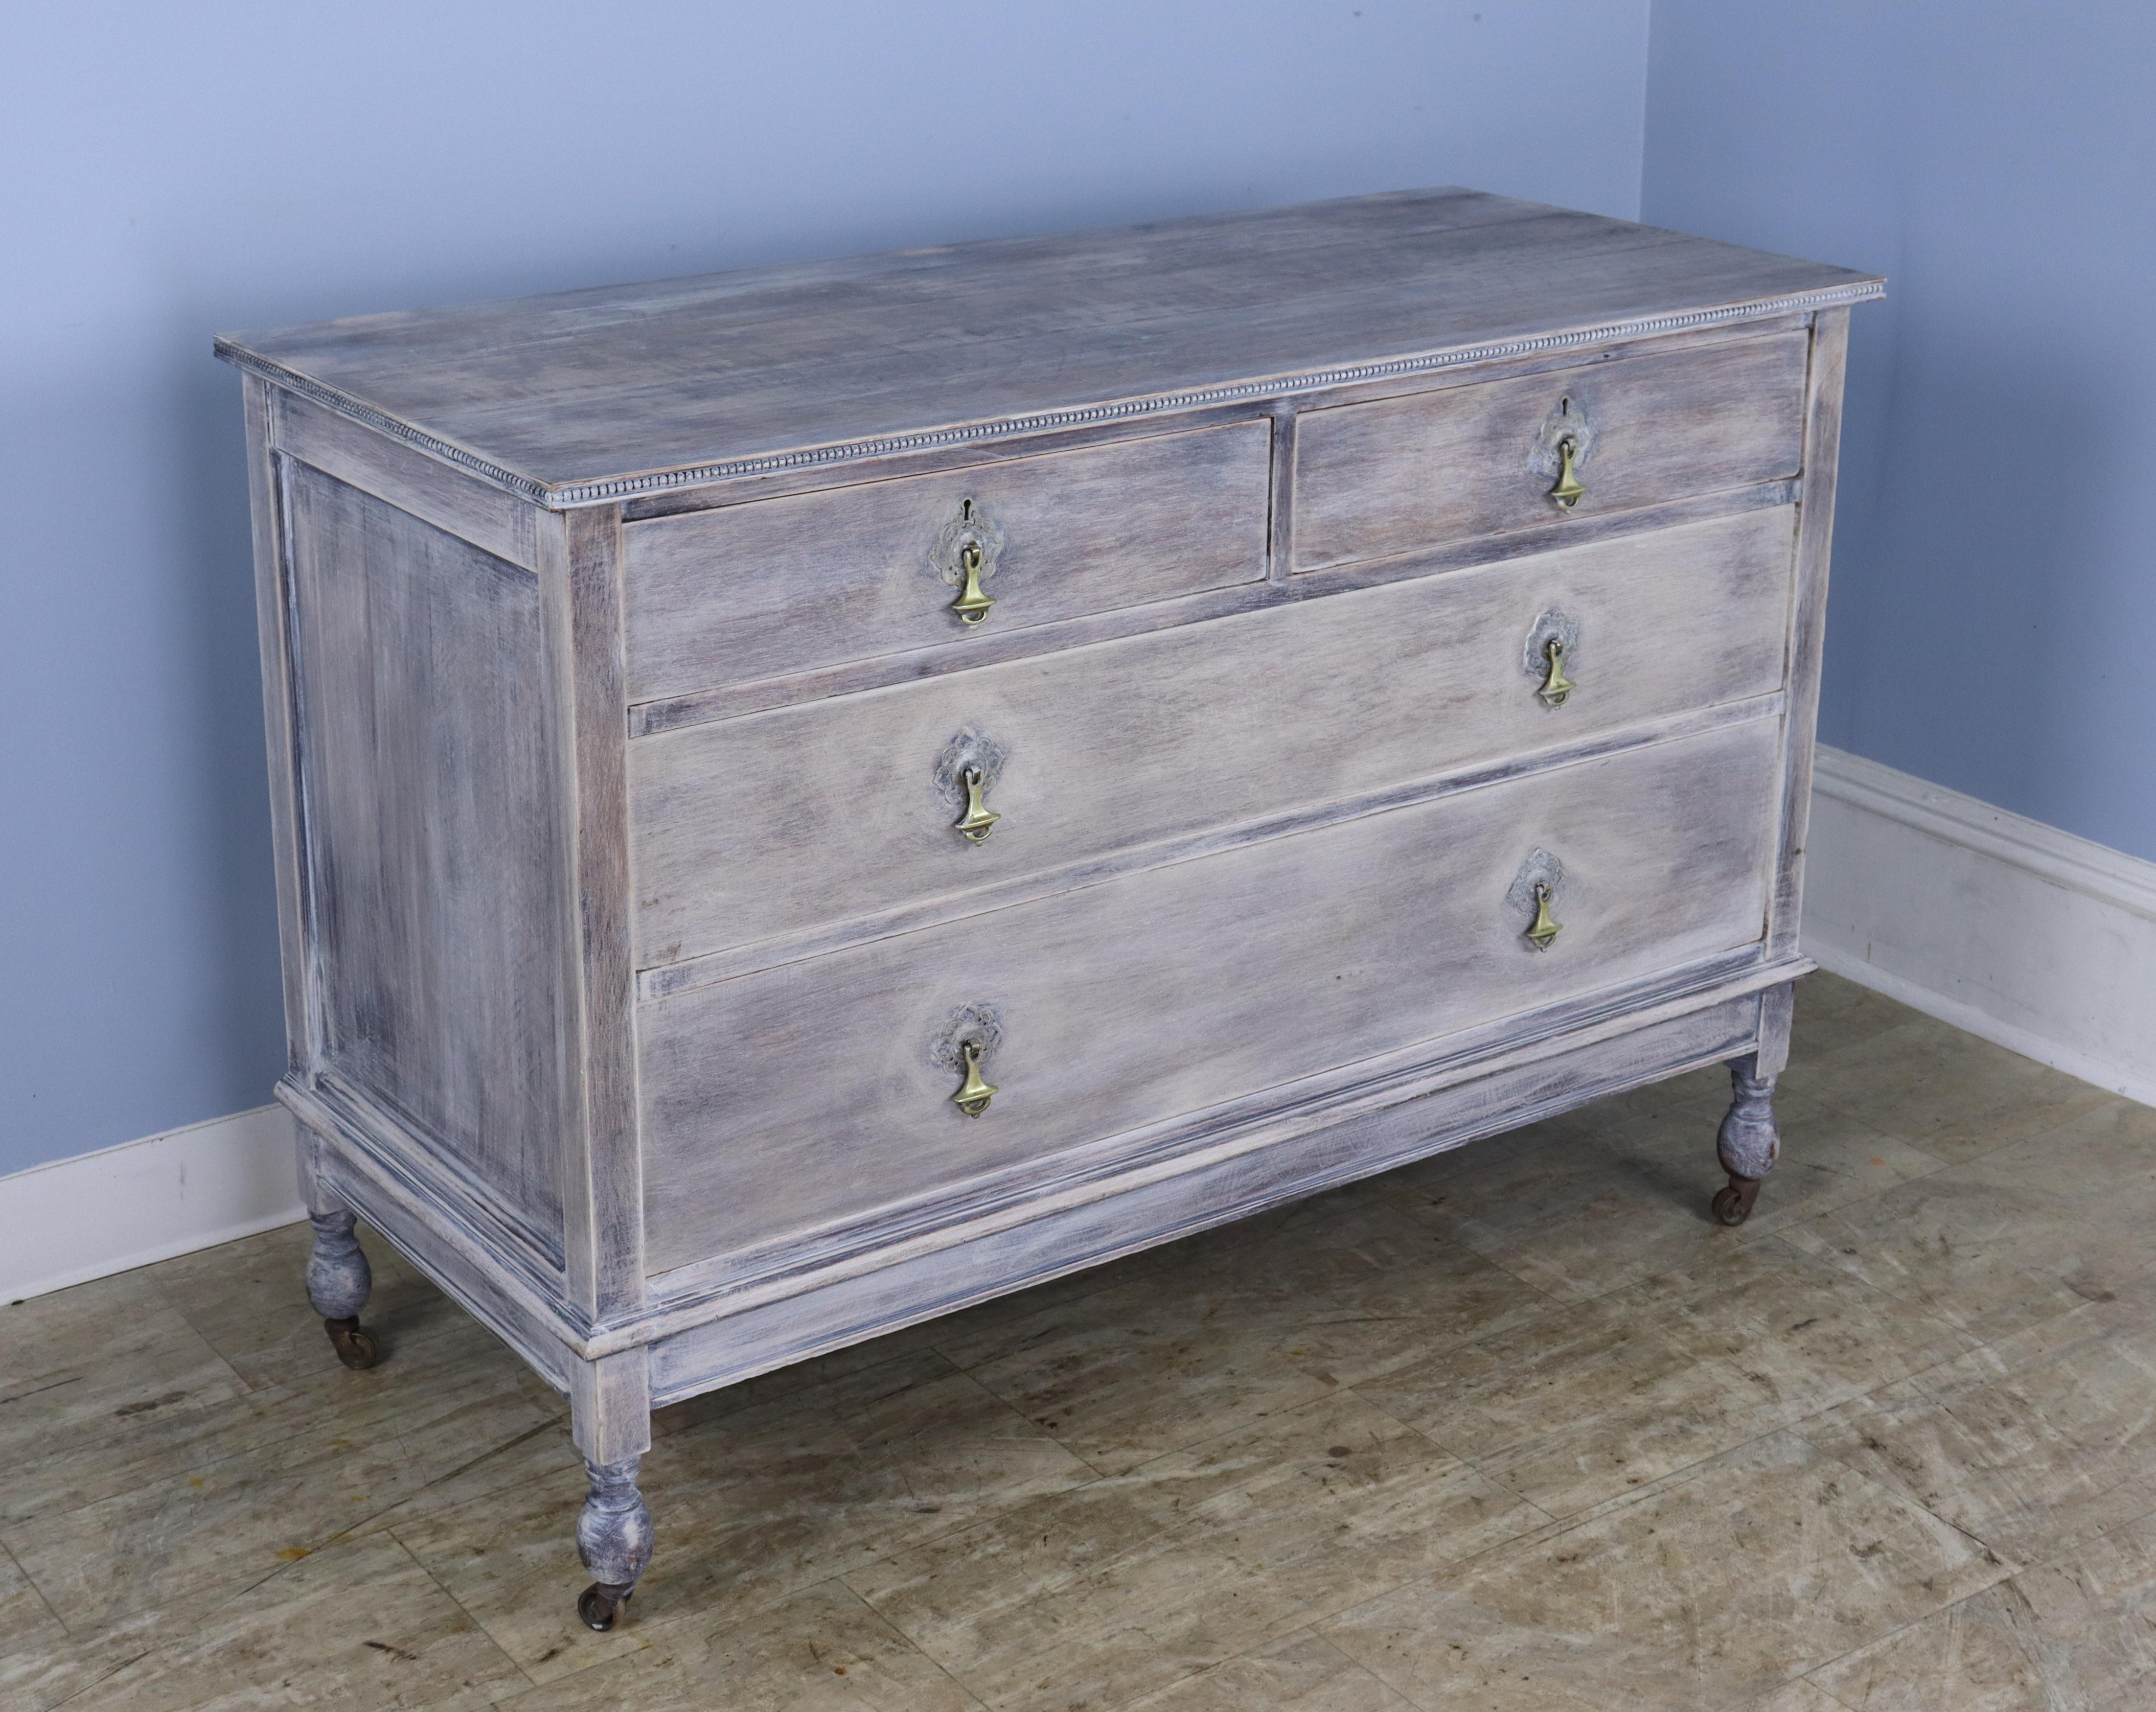 A simple and handsome commode or chest of drawers in the Directoire style, bleached and newly painted very stylishly with notes of gray, blue and russet.  The original drop handles have been polished for a glamourous pop of lightness, and the